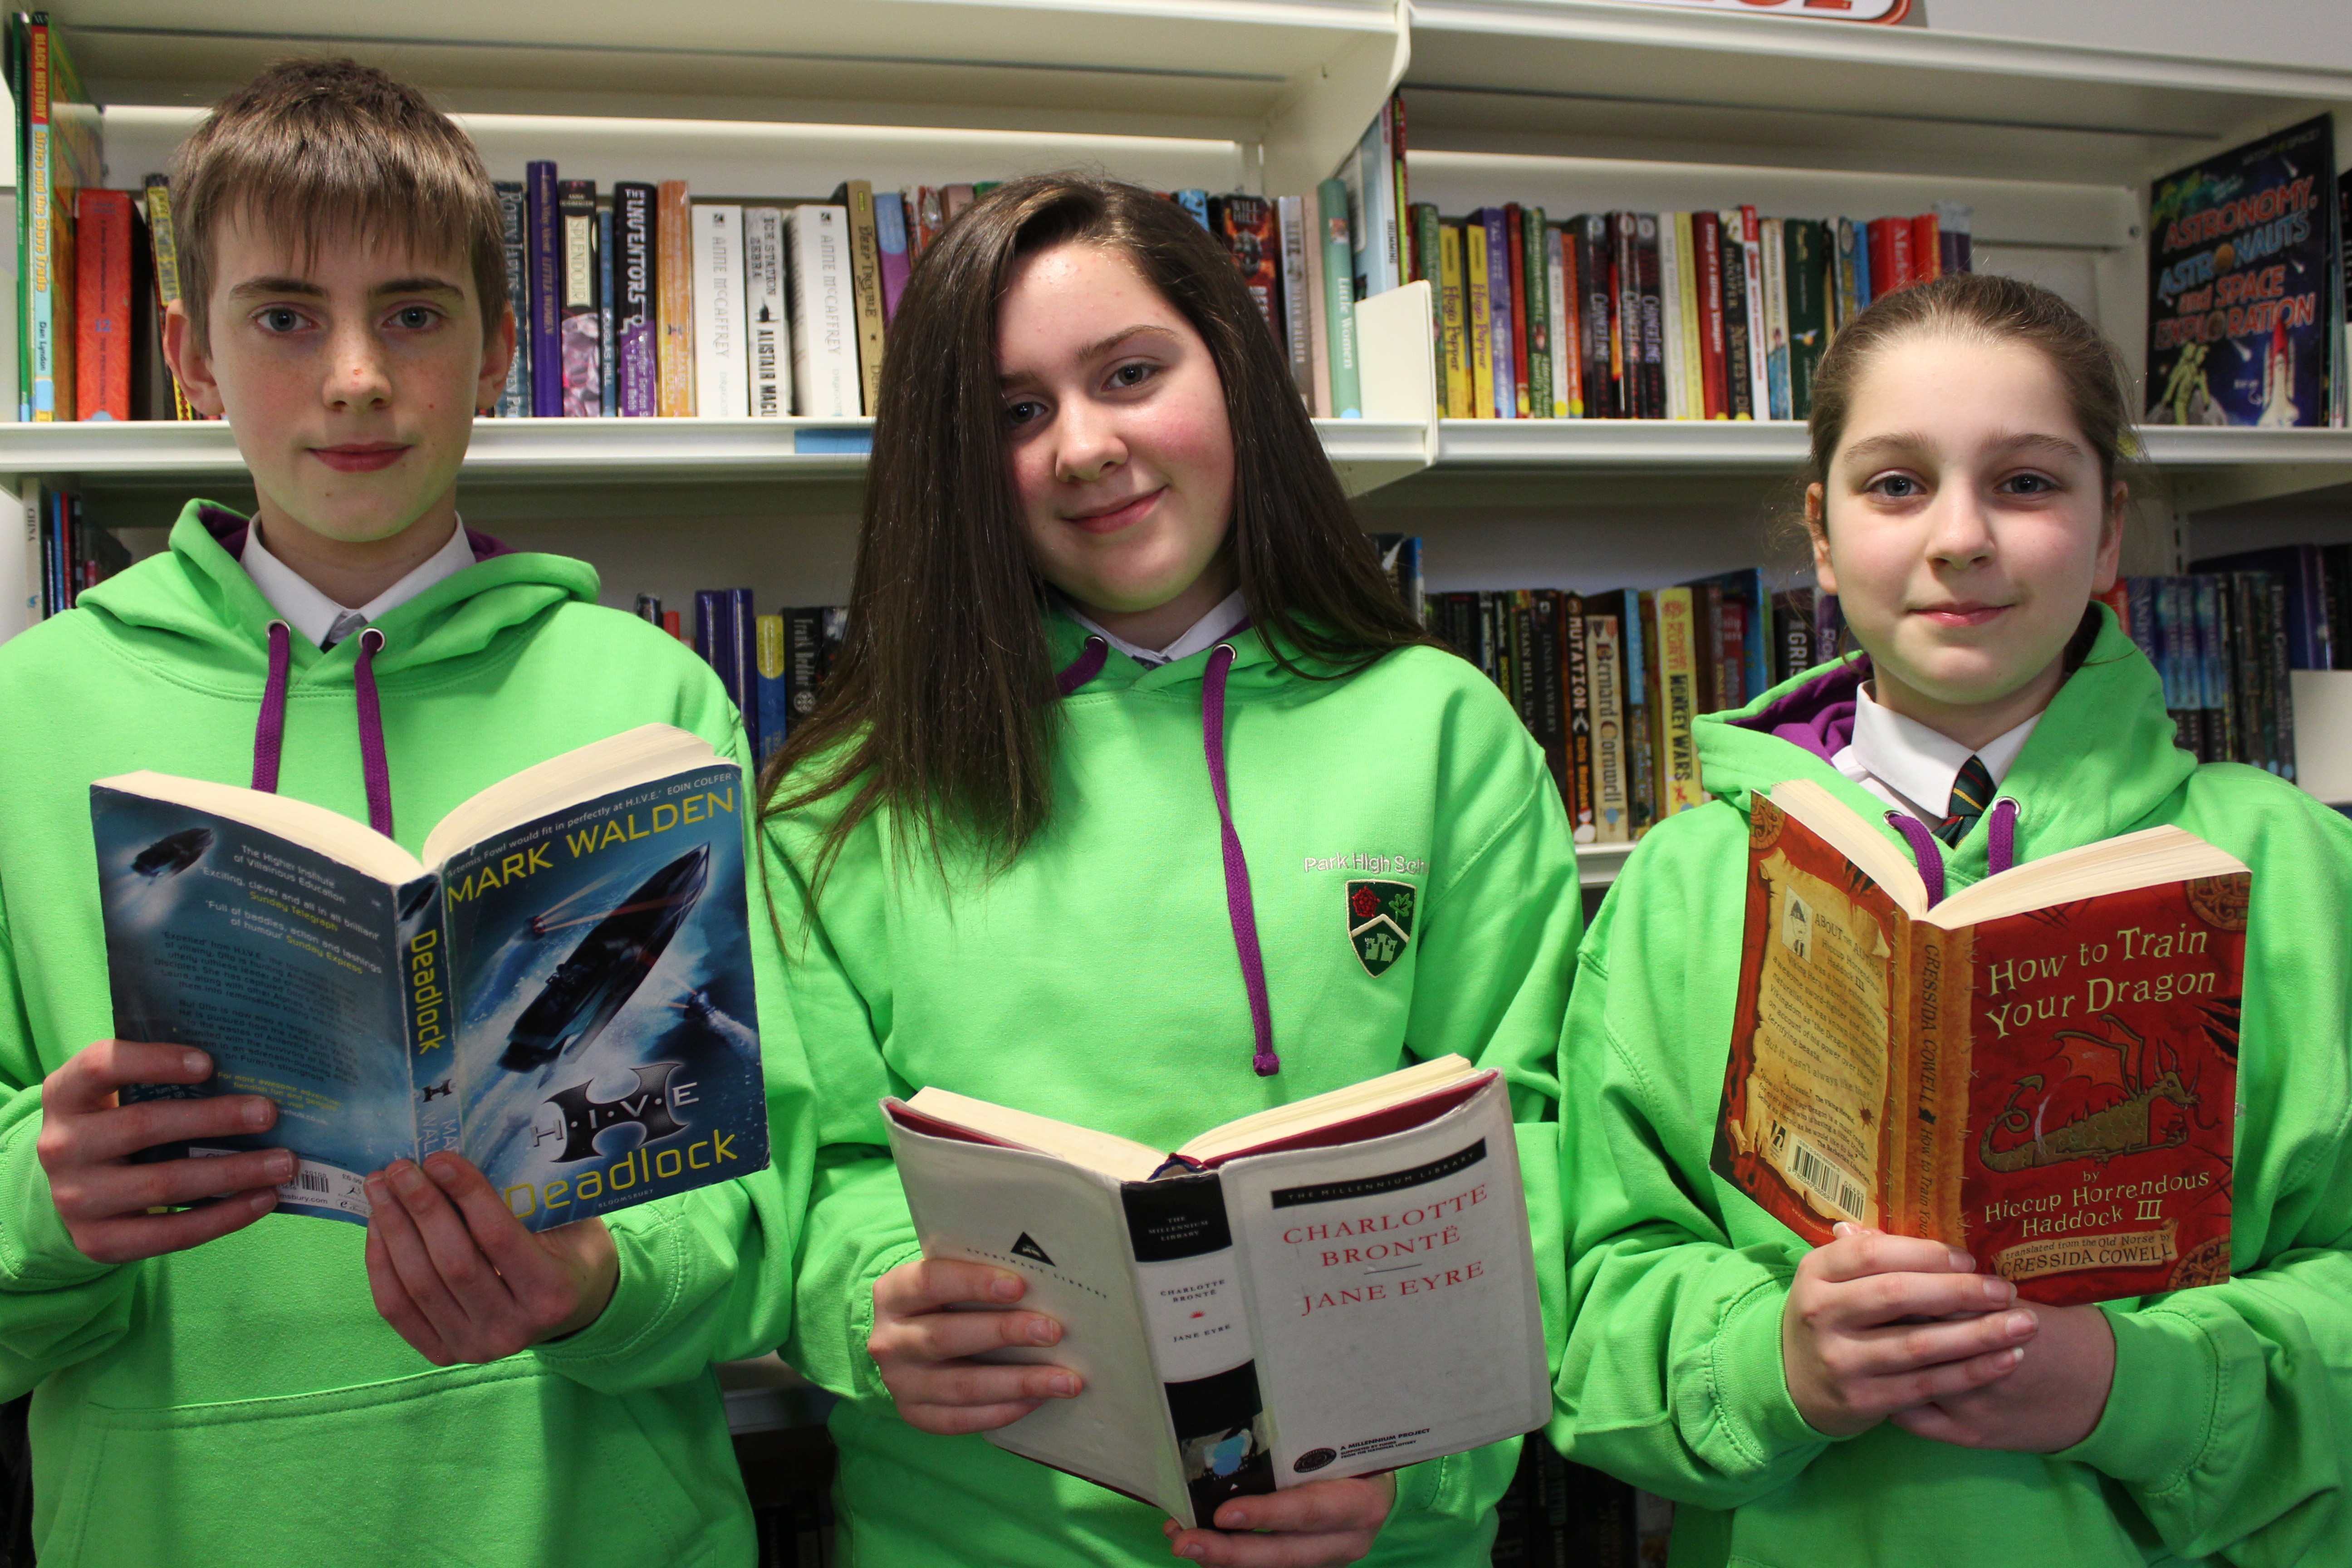 News story on Dragons' Den Pendle Reading Challenge event